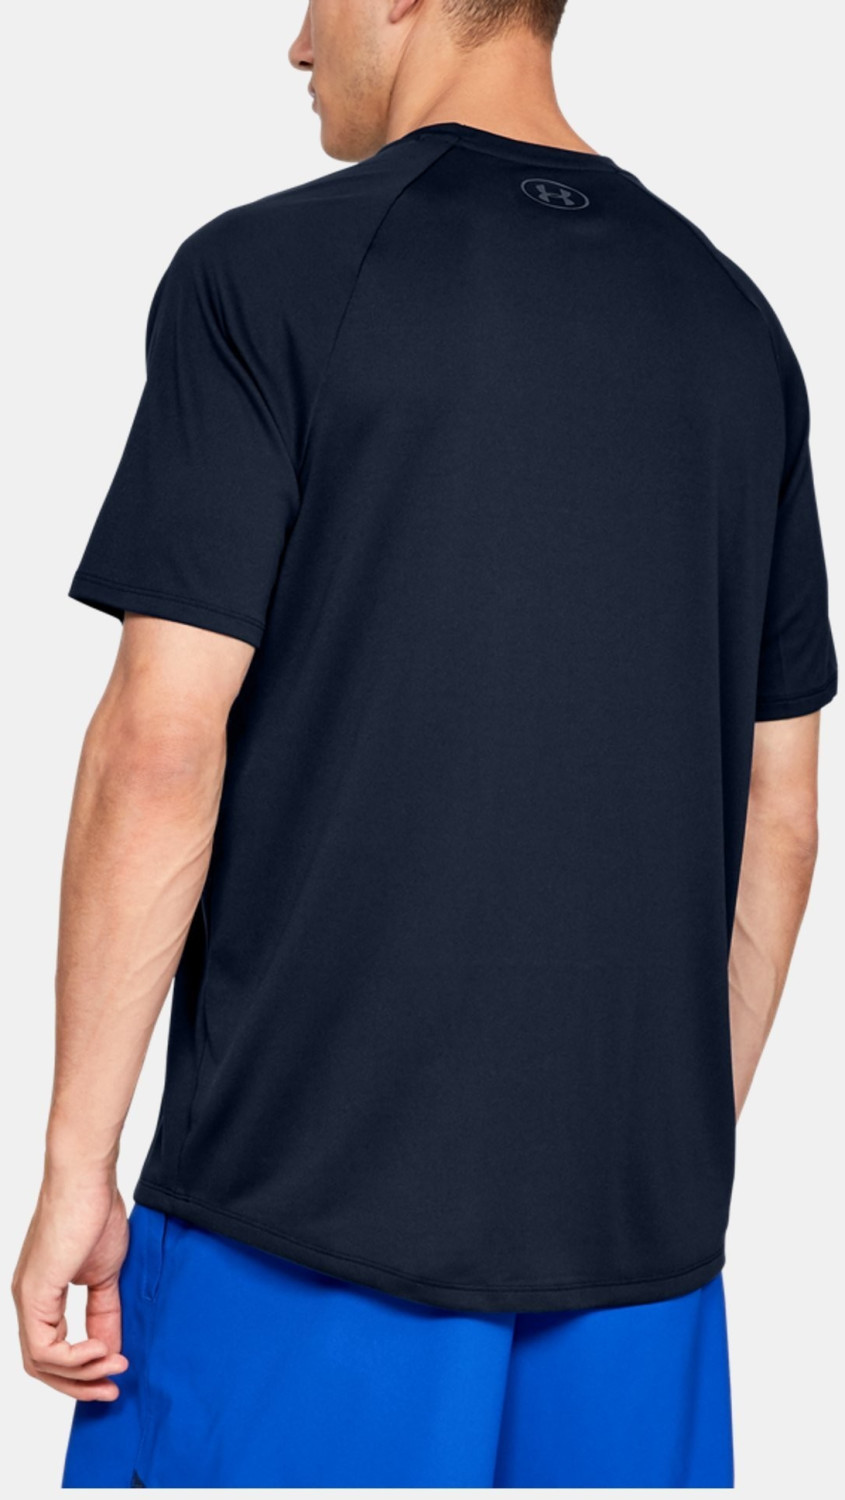 Buy Under Armour UA Tech T-Shirt navy from £17.90 (Today) – Best